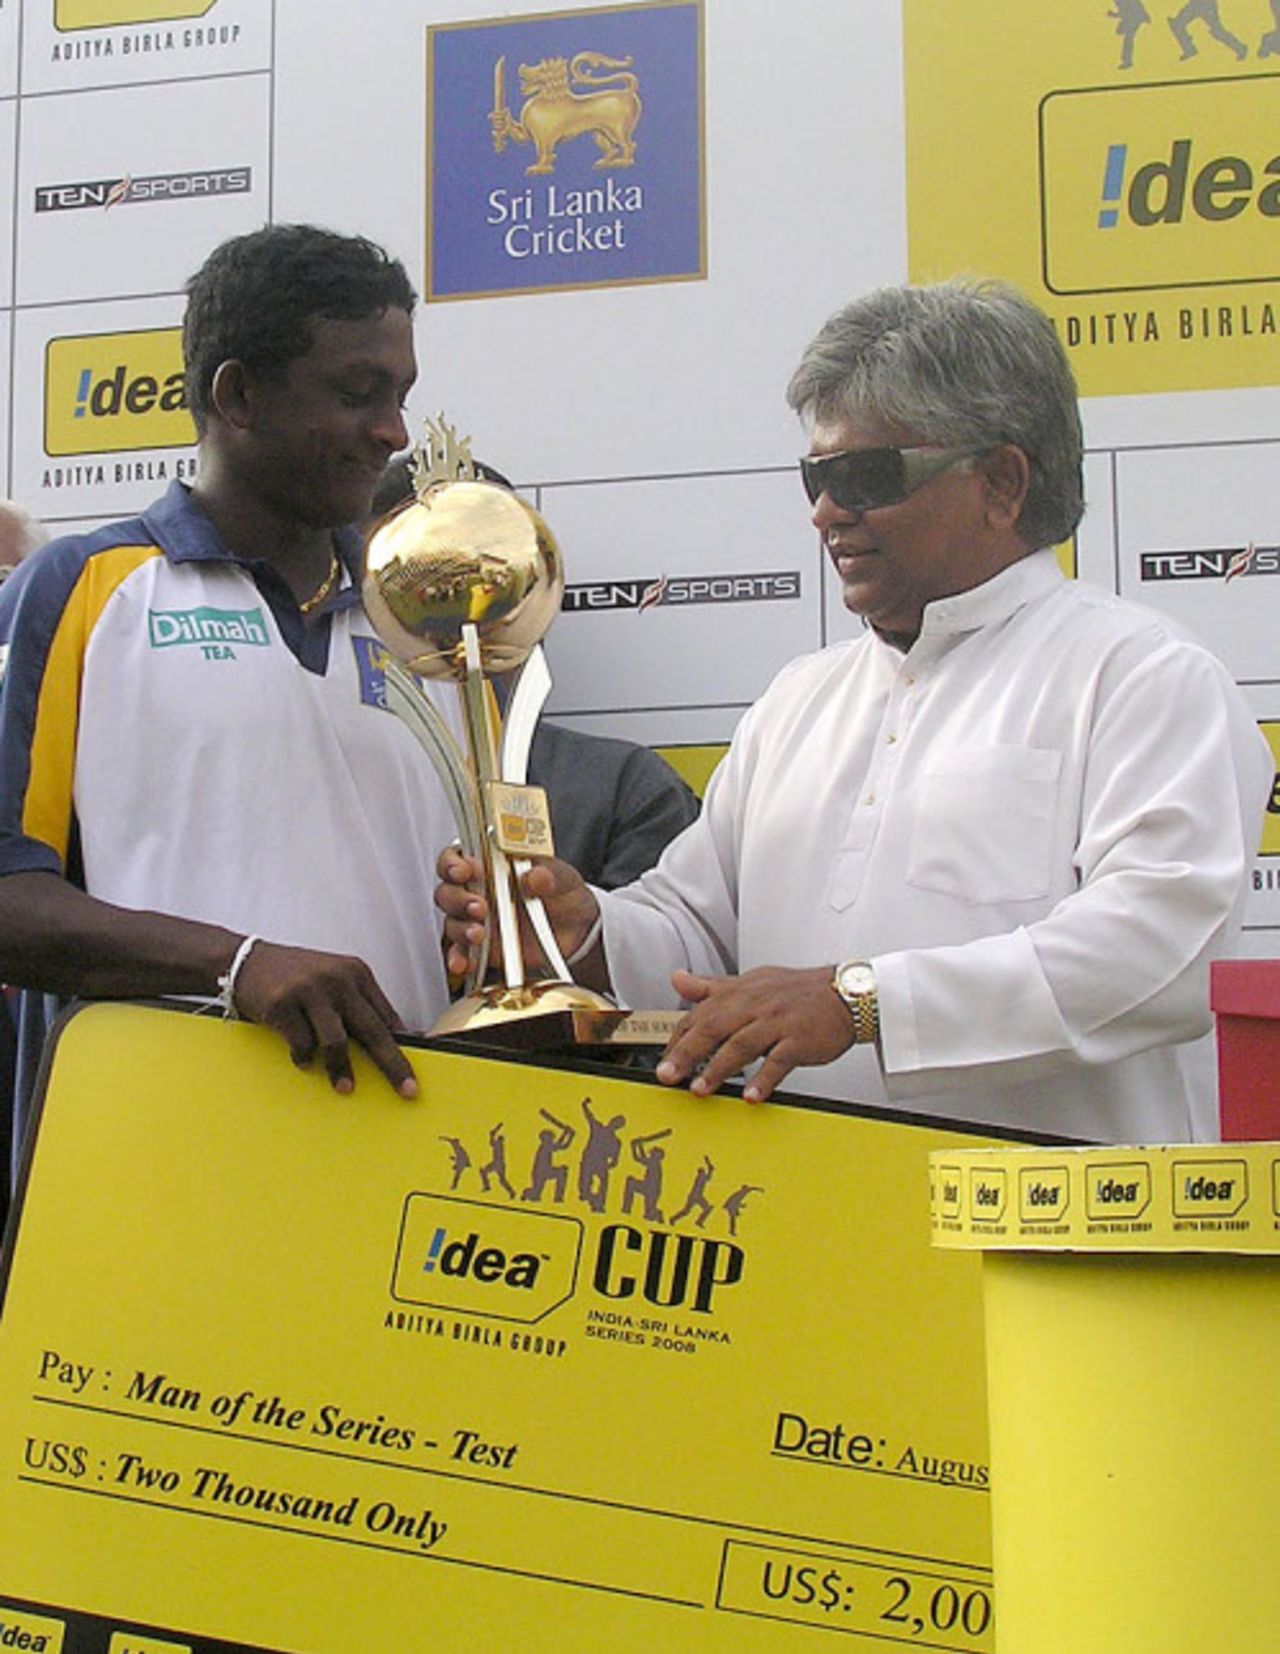 Ajantha Mendis receives the Man-of-the-Series award from Arjuna Ranatunga, Sri Lanka v India, 3rd Test, PSS, Colombo, 4th day, August 11, 2008